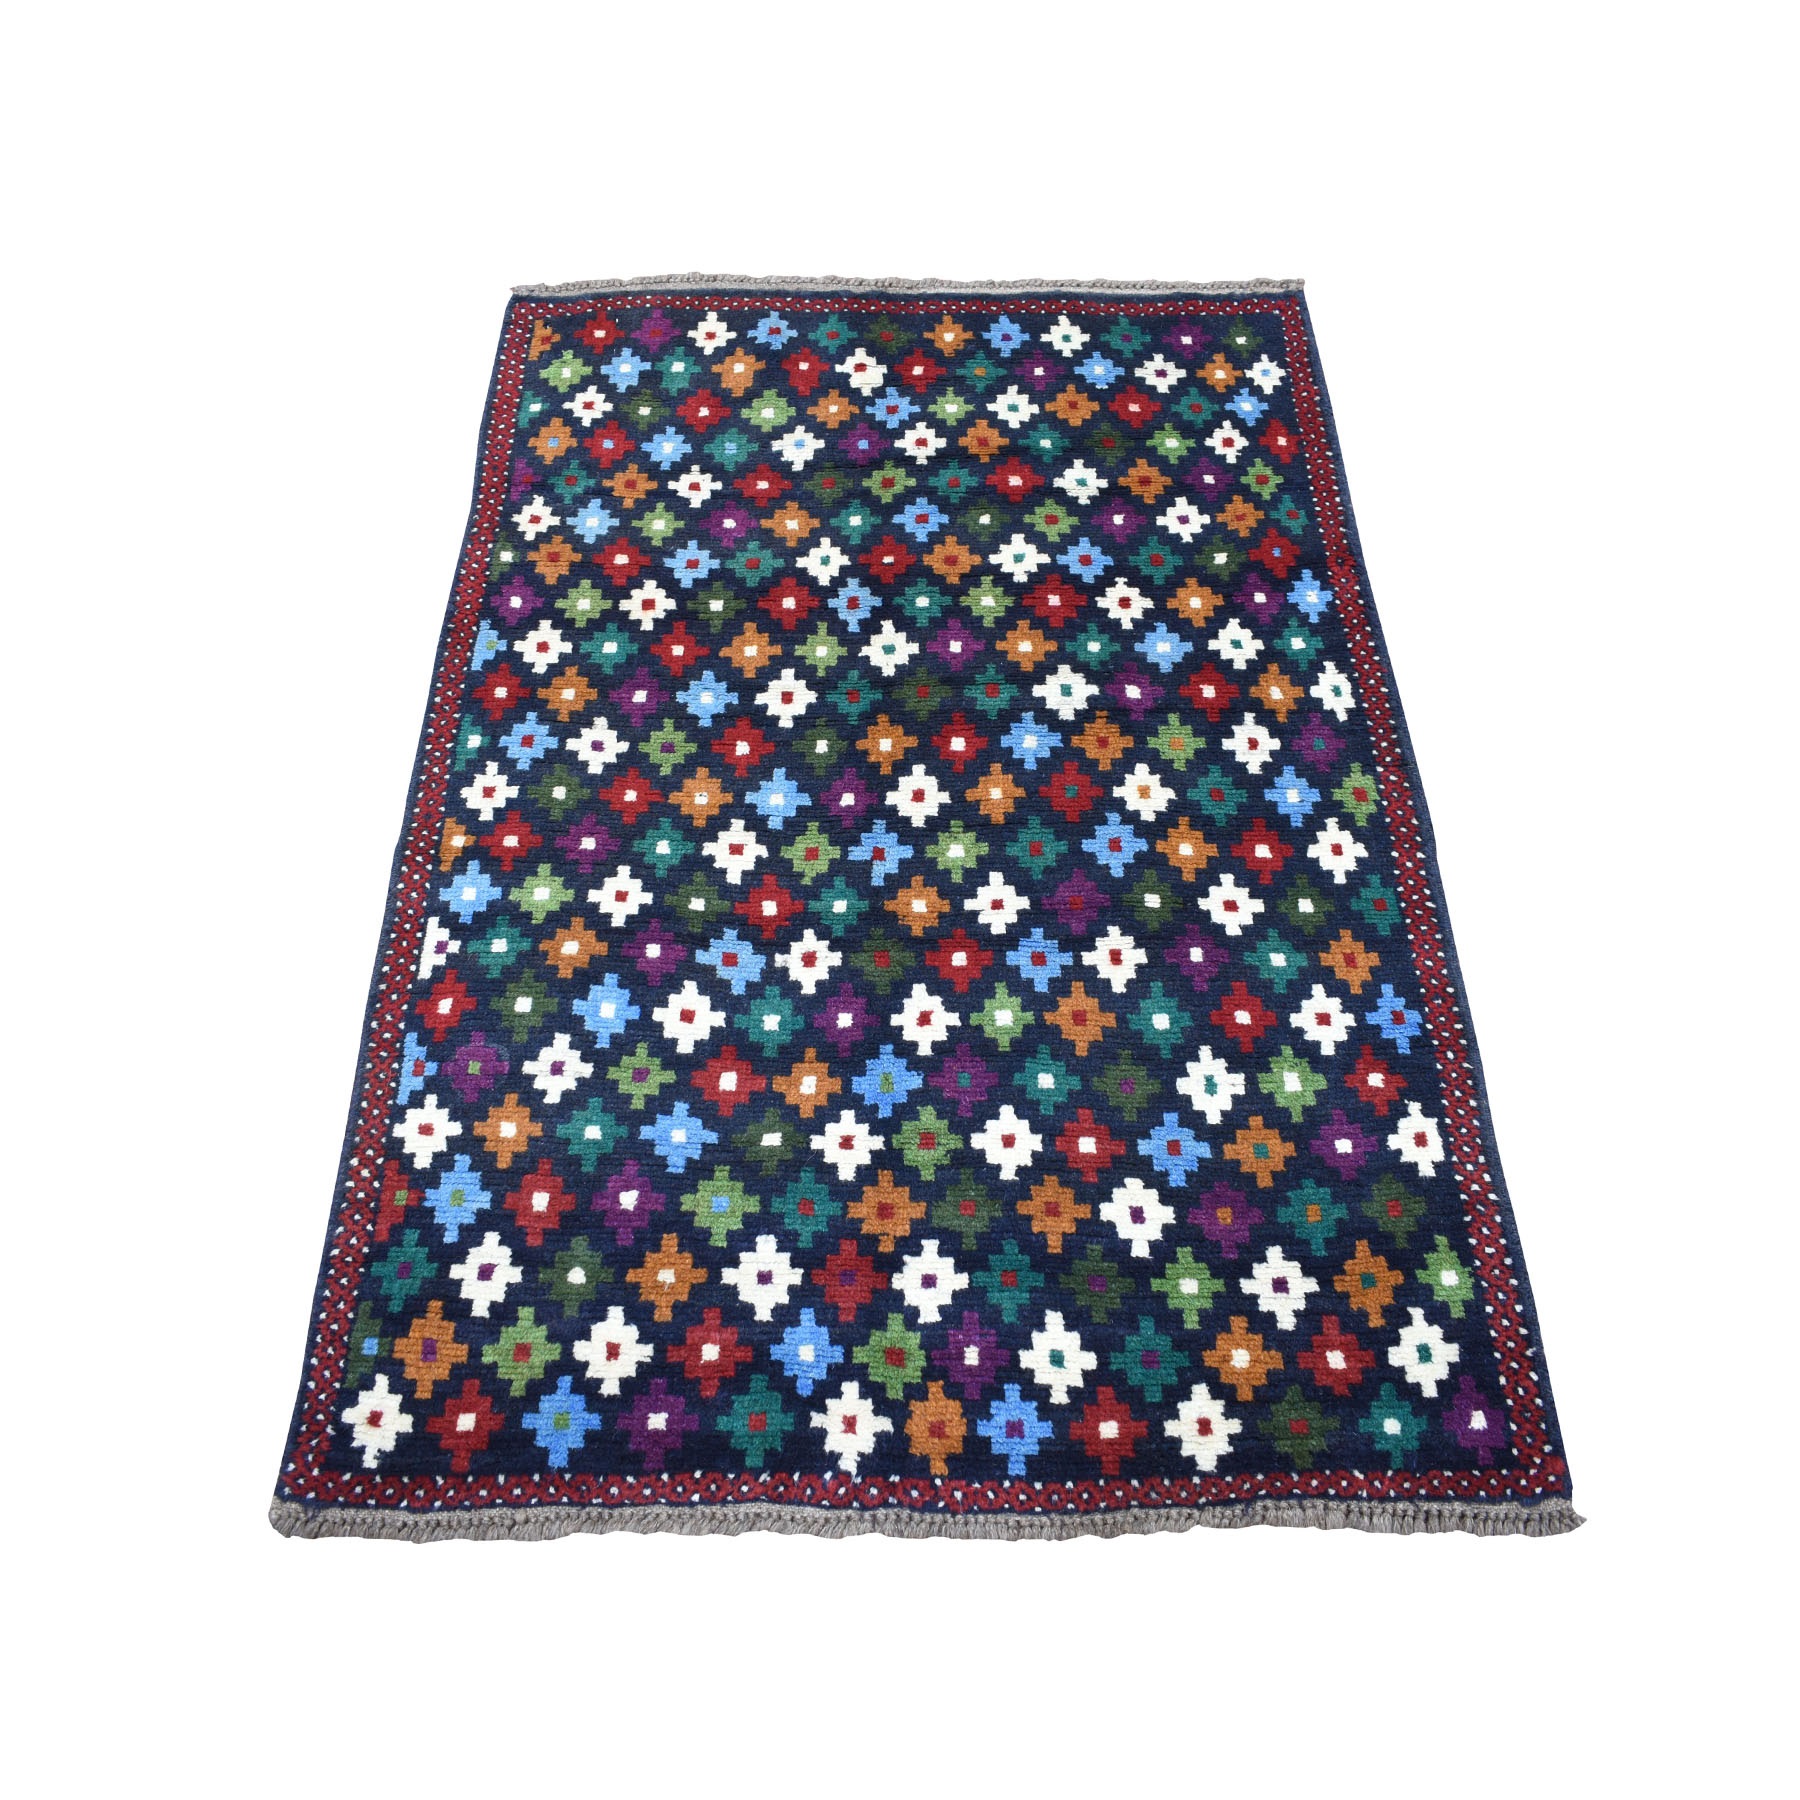 3'4"x4'8" Blue Colorful Afghan Baluch All Over Design Pure Wool Hand Woven Oriental Rug 